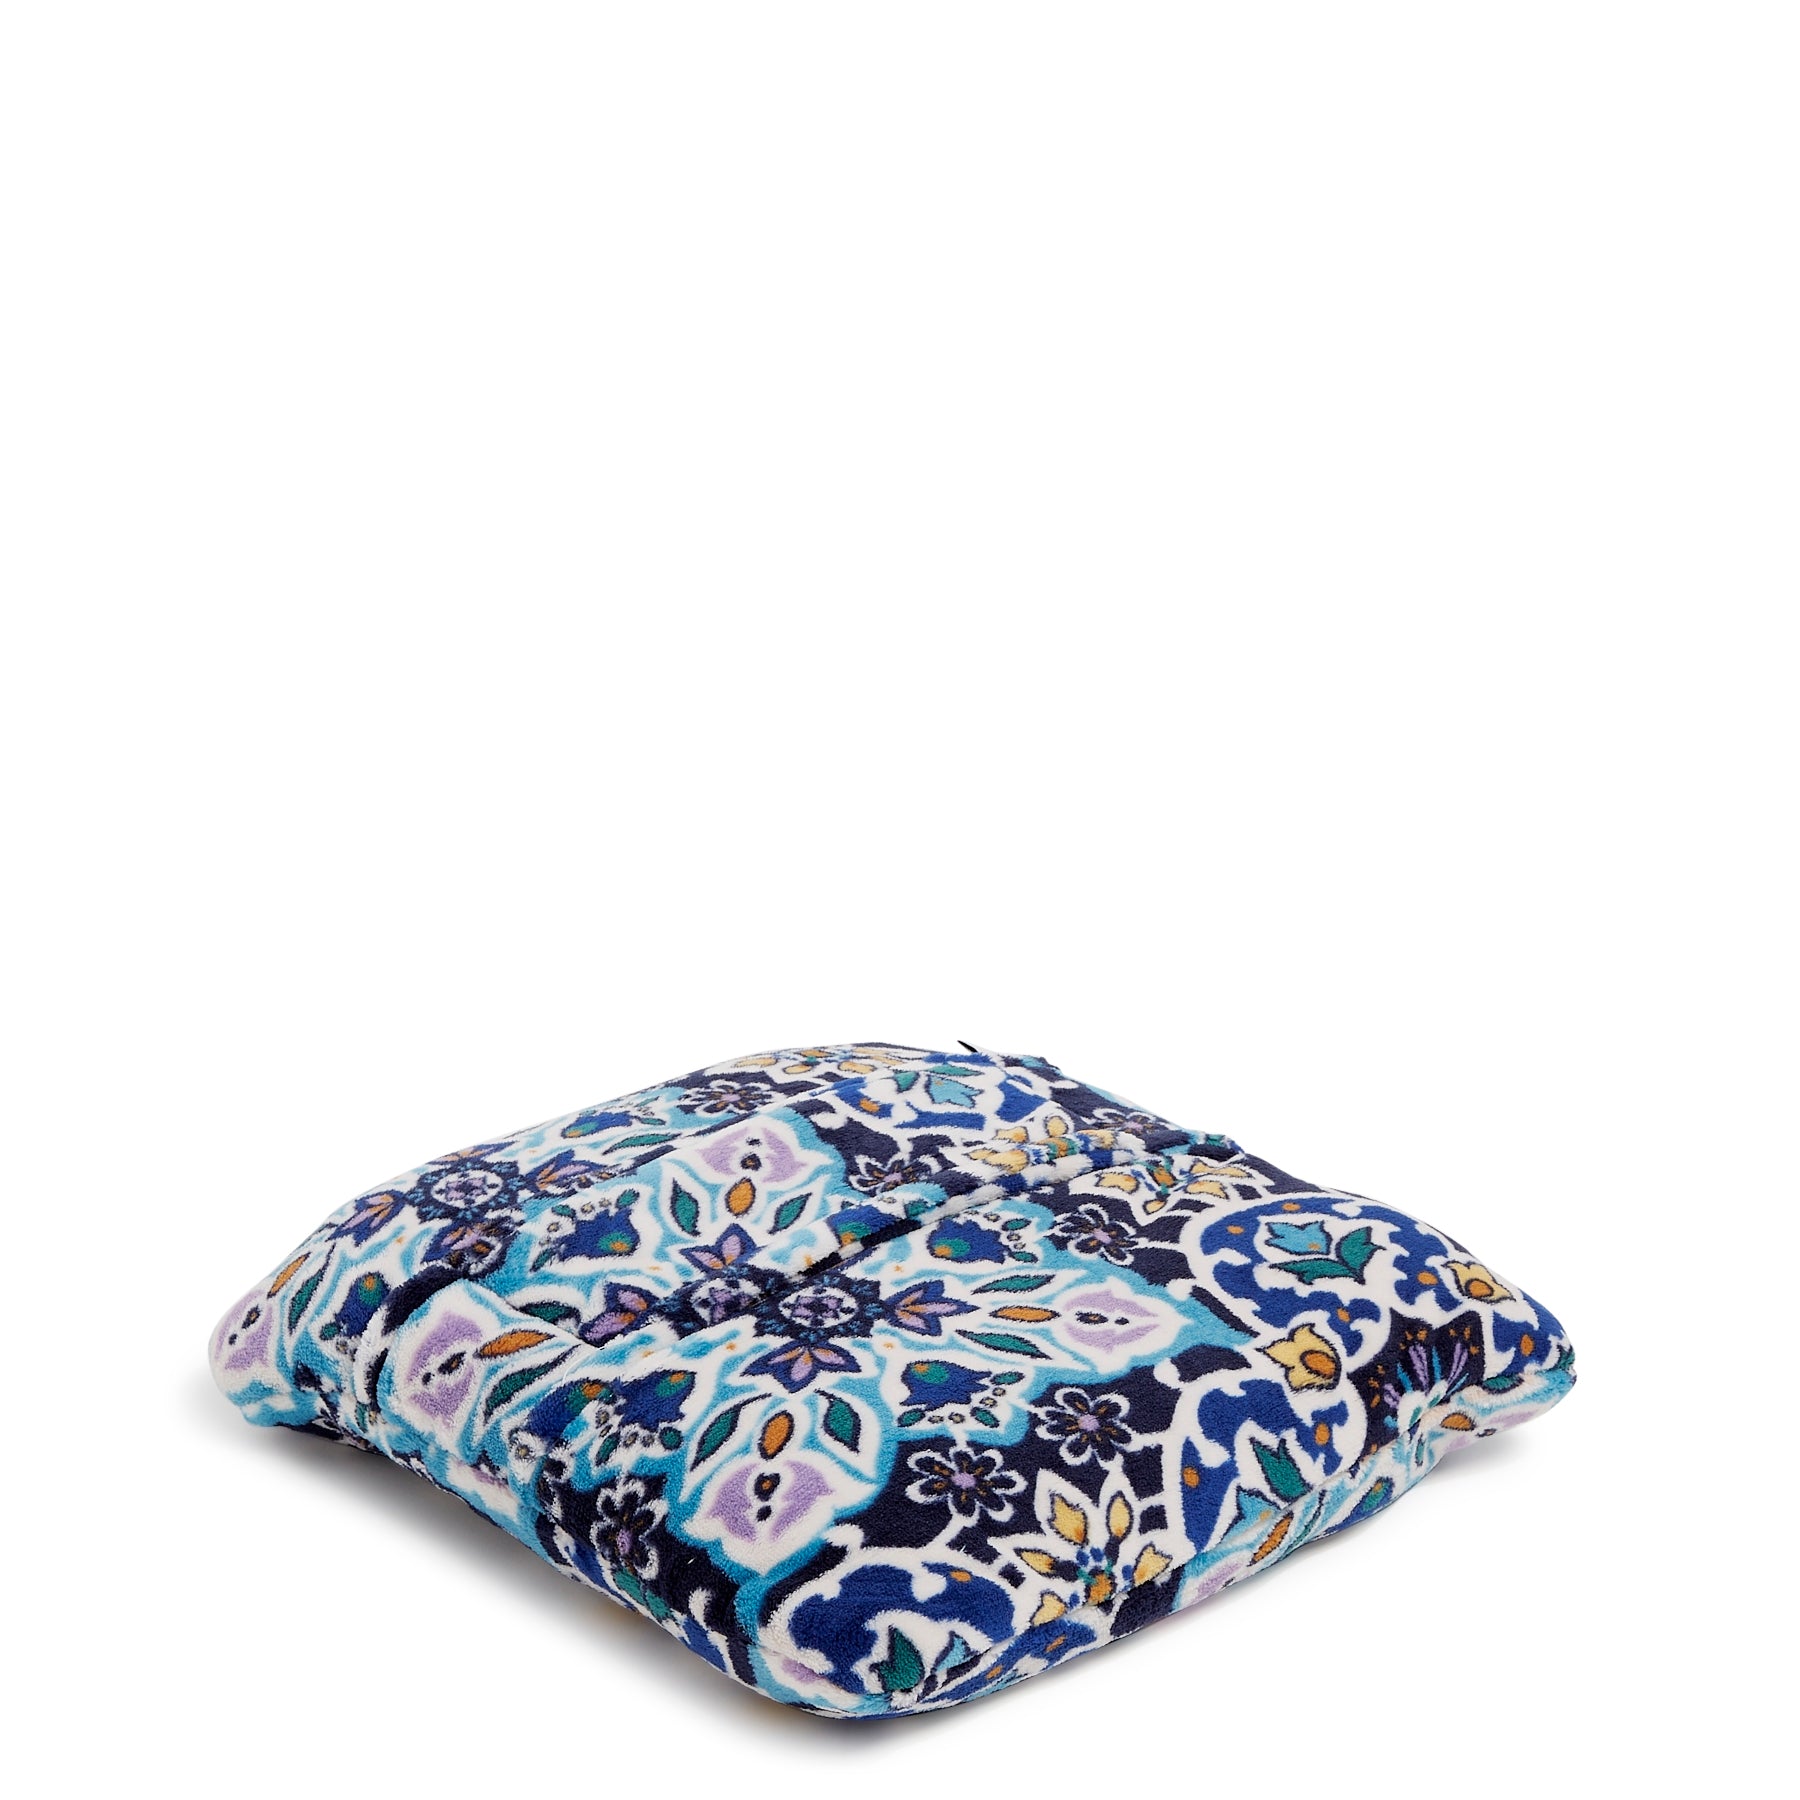 Vera Bradley Sale: Fleece Travel Blanket $12.37, Cotton Essential Compact Sling Backpack $18.63 & More + Free Shipping